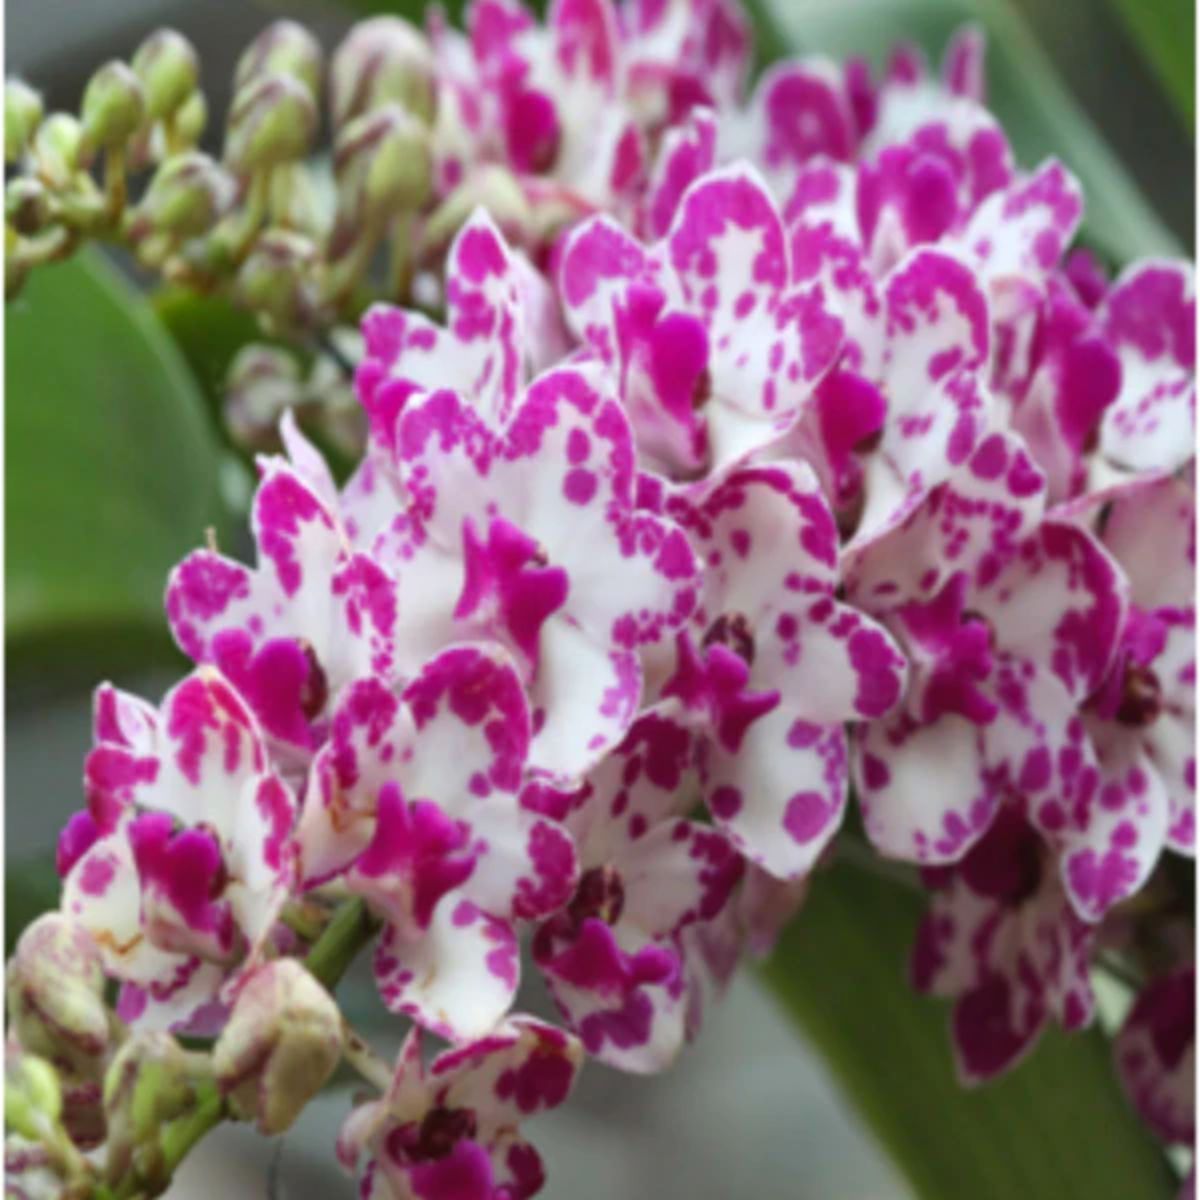 Rhynchostylis Gigantea Ply Orchid - Exquisite Purple and White Blossoms in Full Bloom